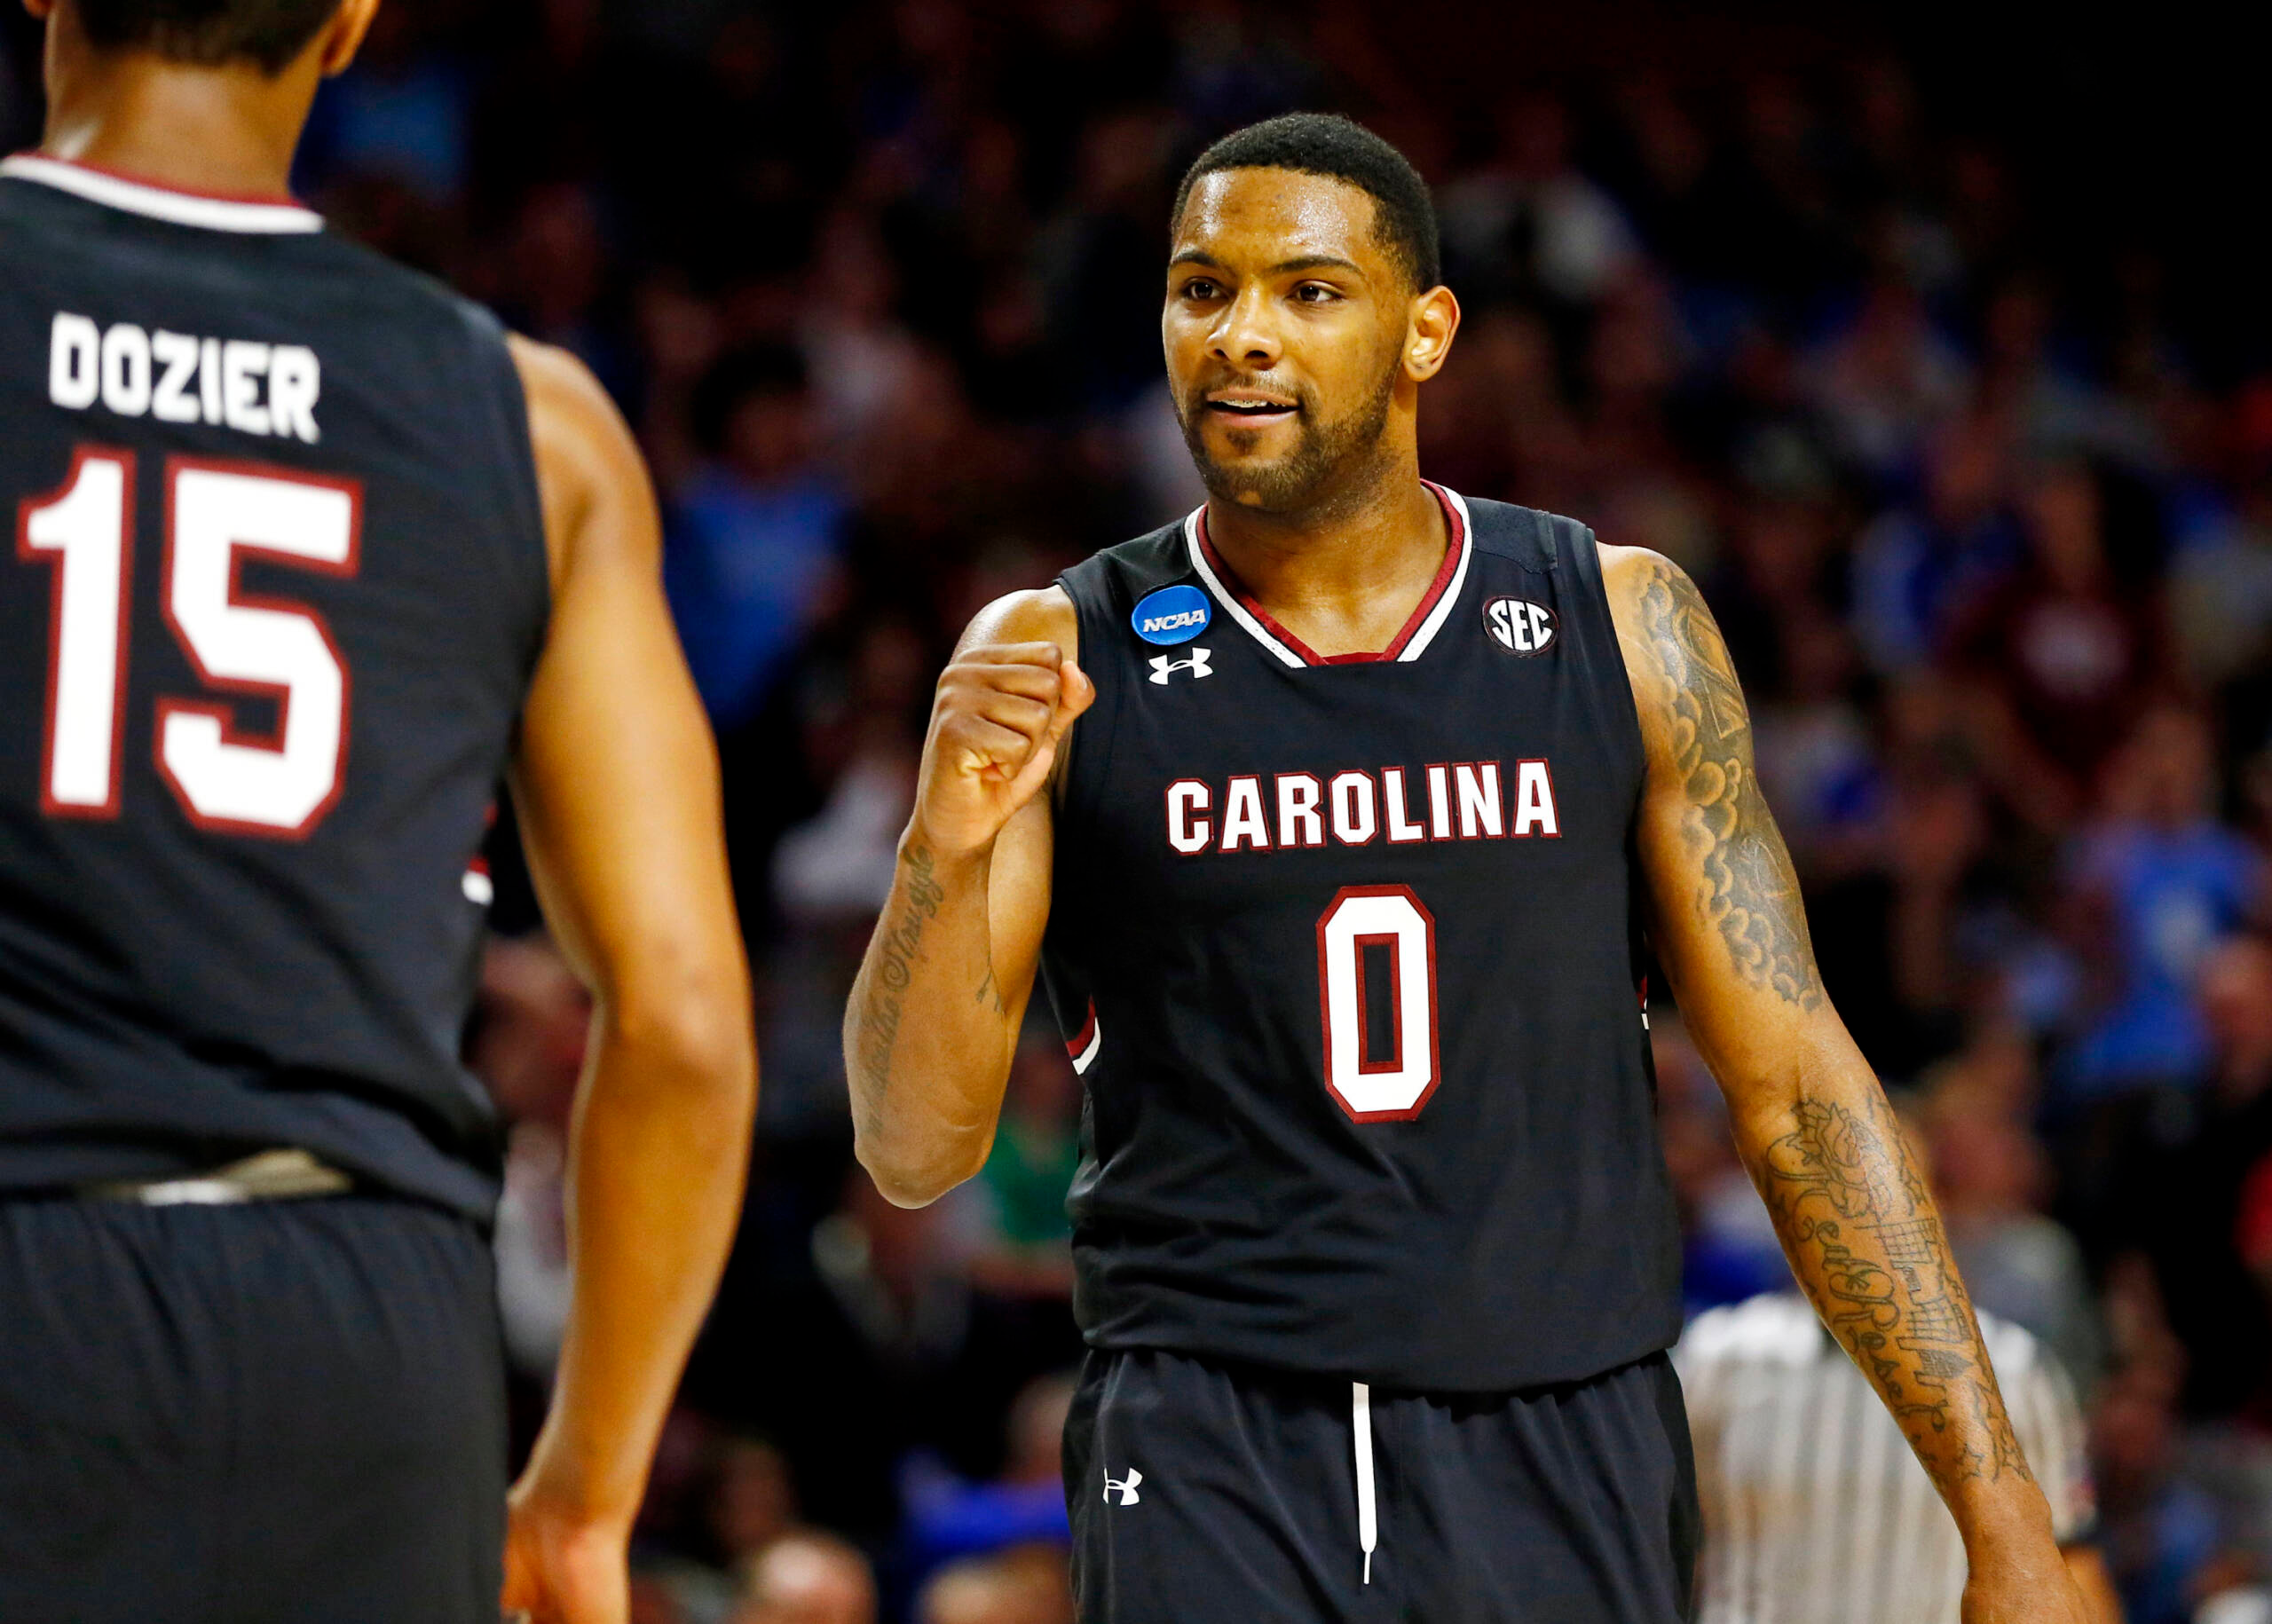 Dozier, Thornwell Selected For NBA Draft Combine